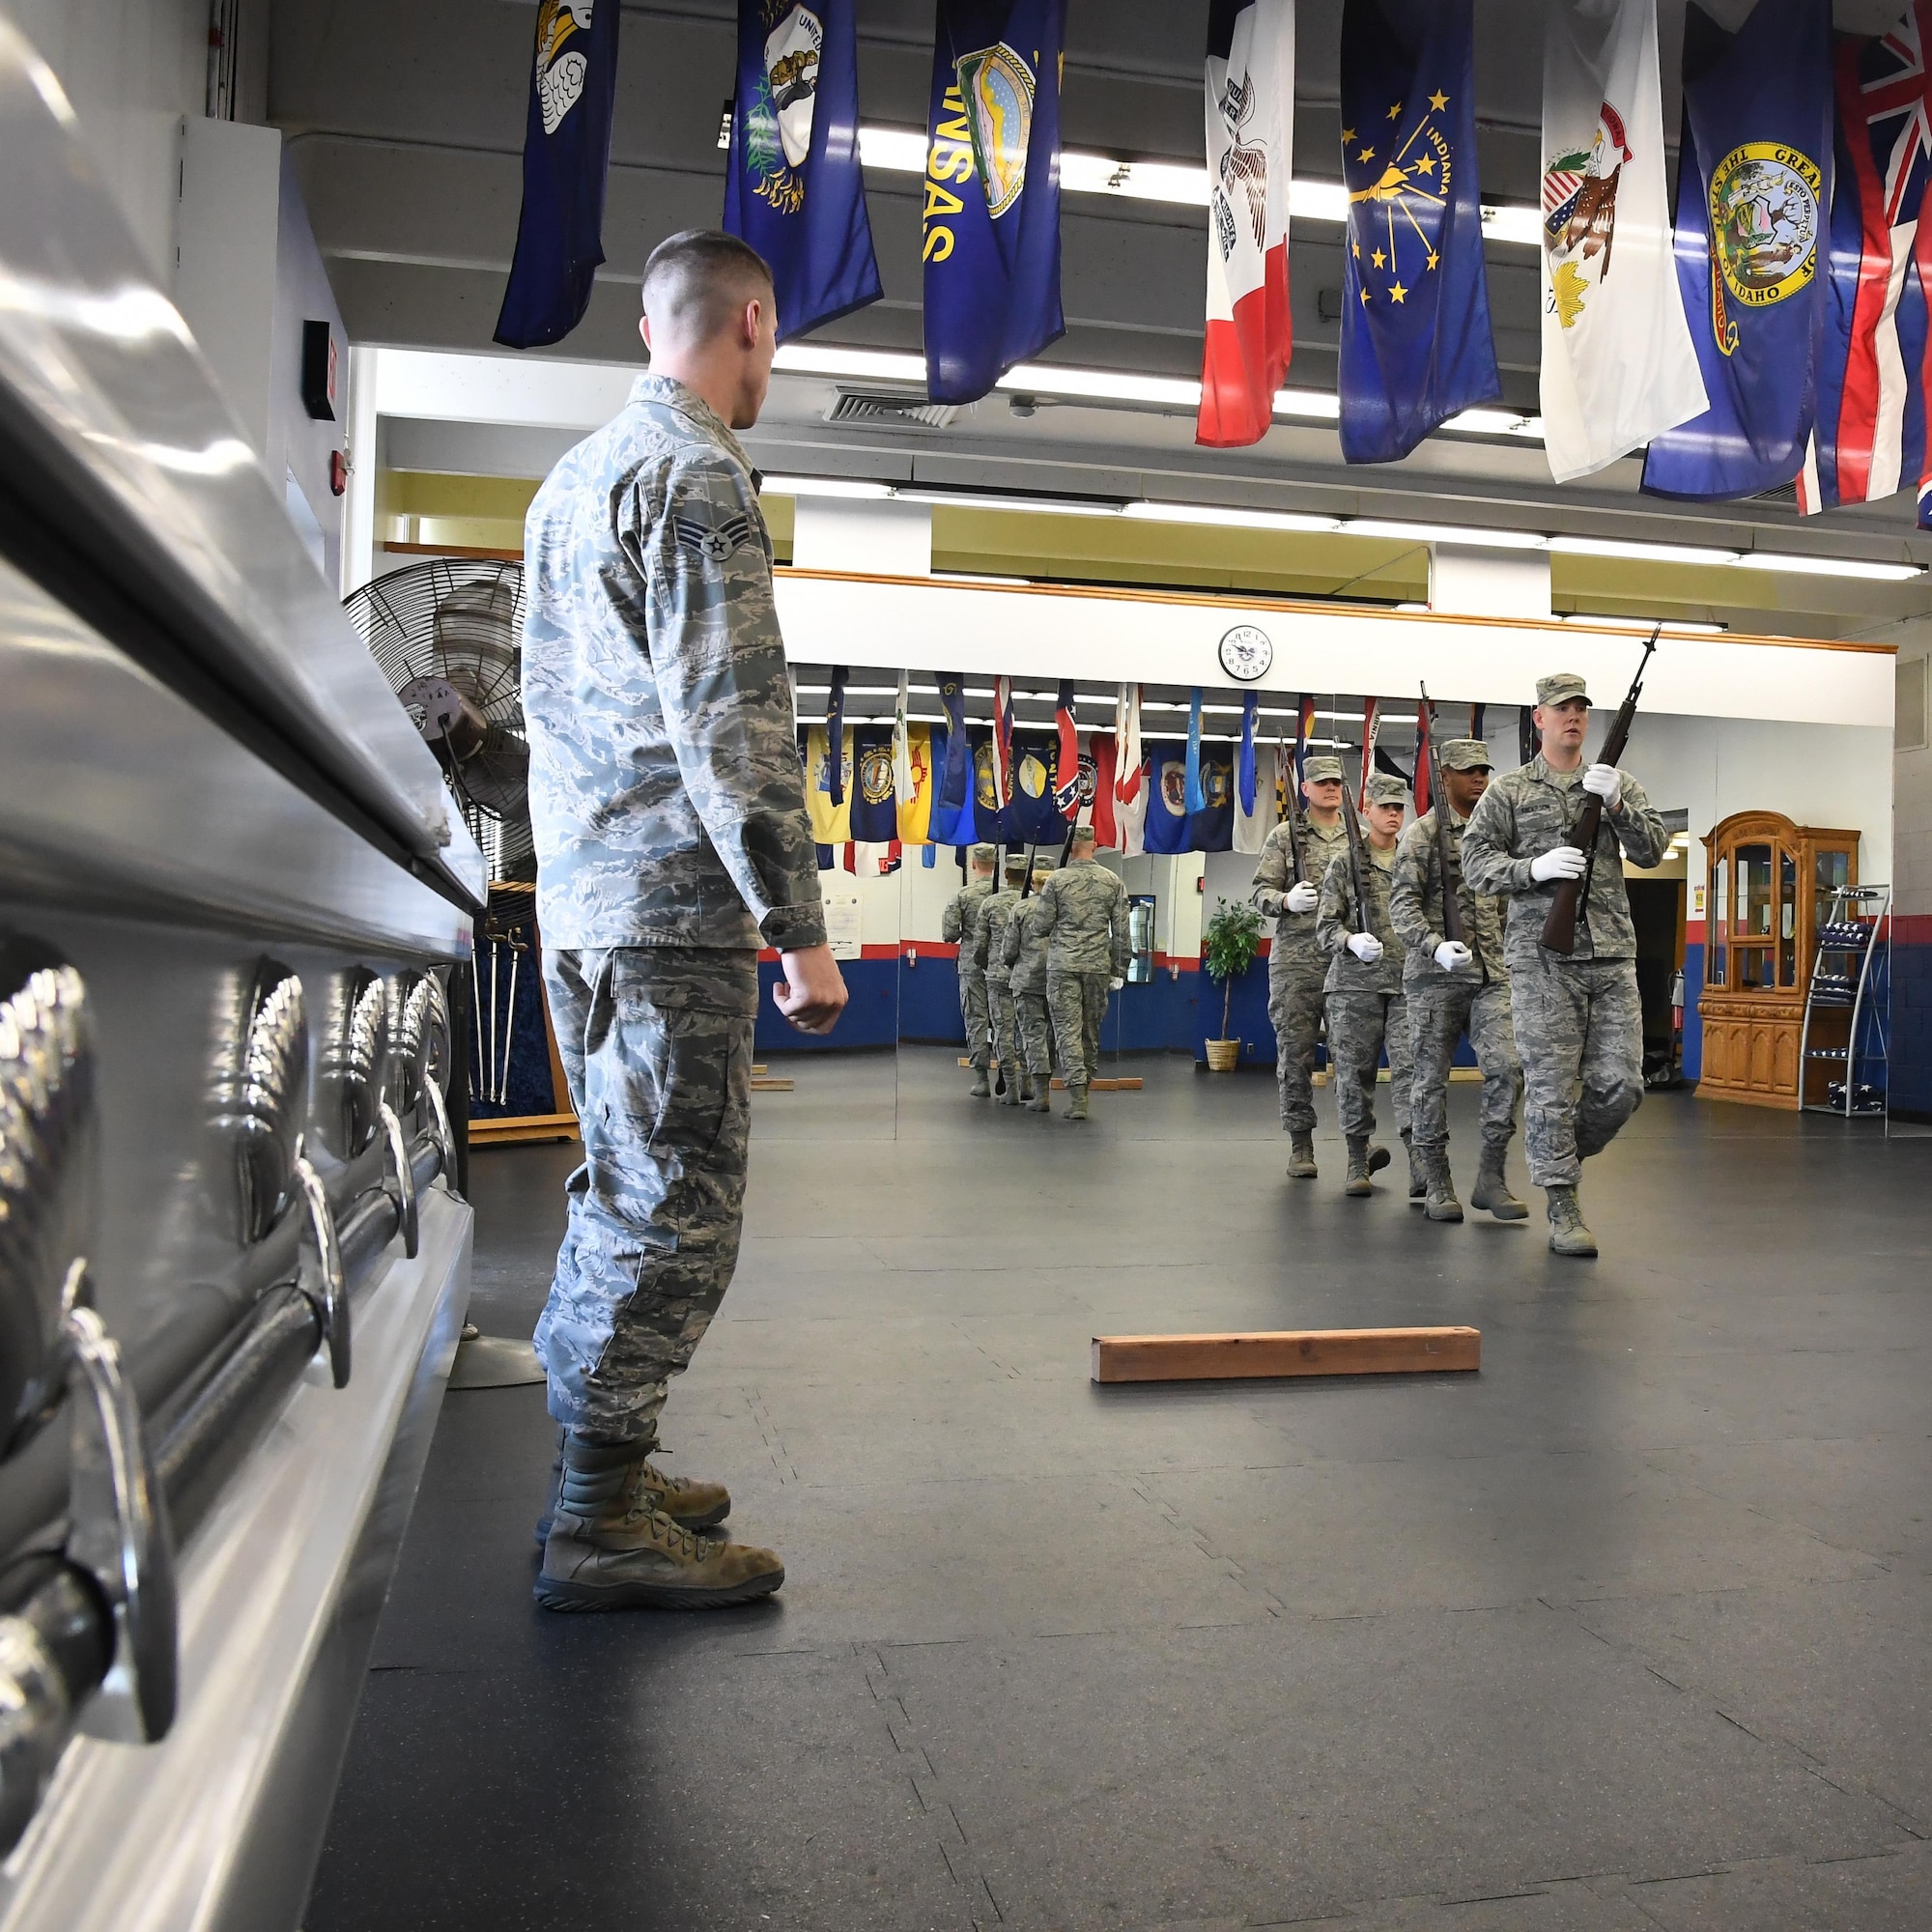 Hill AFB Honor Guard members conduct rippled movement drills under the watchful eye of Lead Honor Guard Instructor Senior Airman Timothy Potter, March 7, 2017. Ripple movements are initiated by the first rank and repeated down the ranks on each left heel beat creating a rippled, or waved, appearance. Ceremonial guardsmen are experts in military drill, ceremonies and protocol. (U.S. Air Force photo/R. Nial Bradshaw)